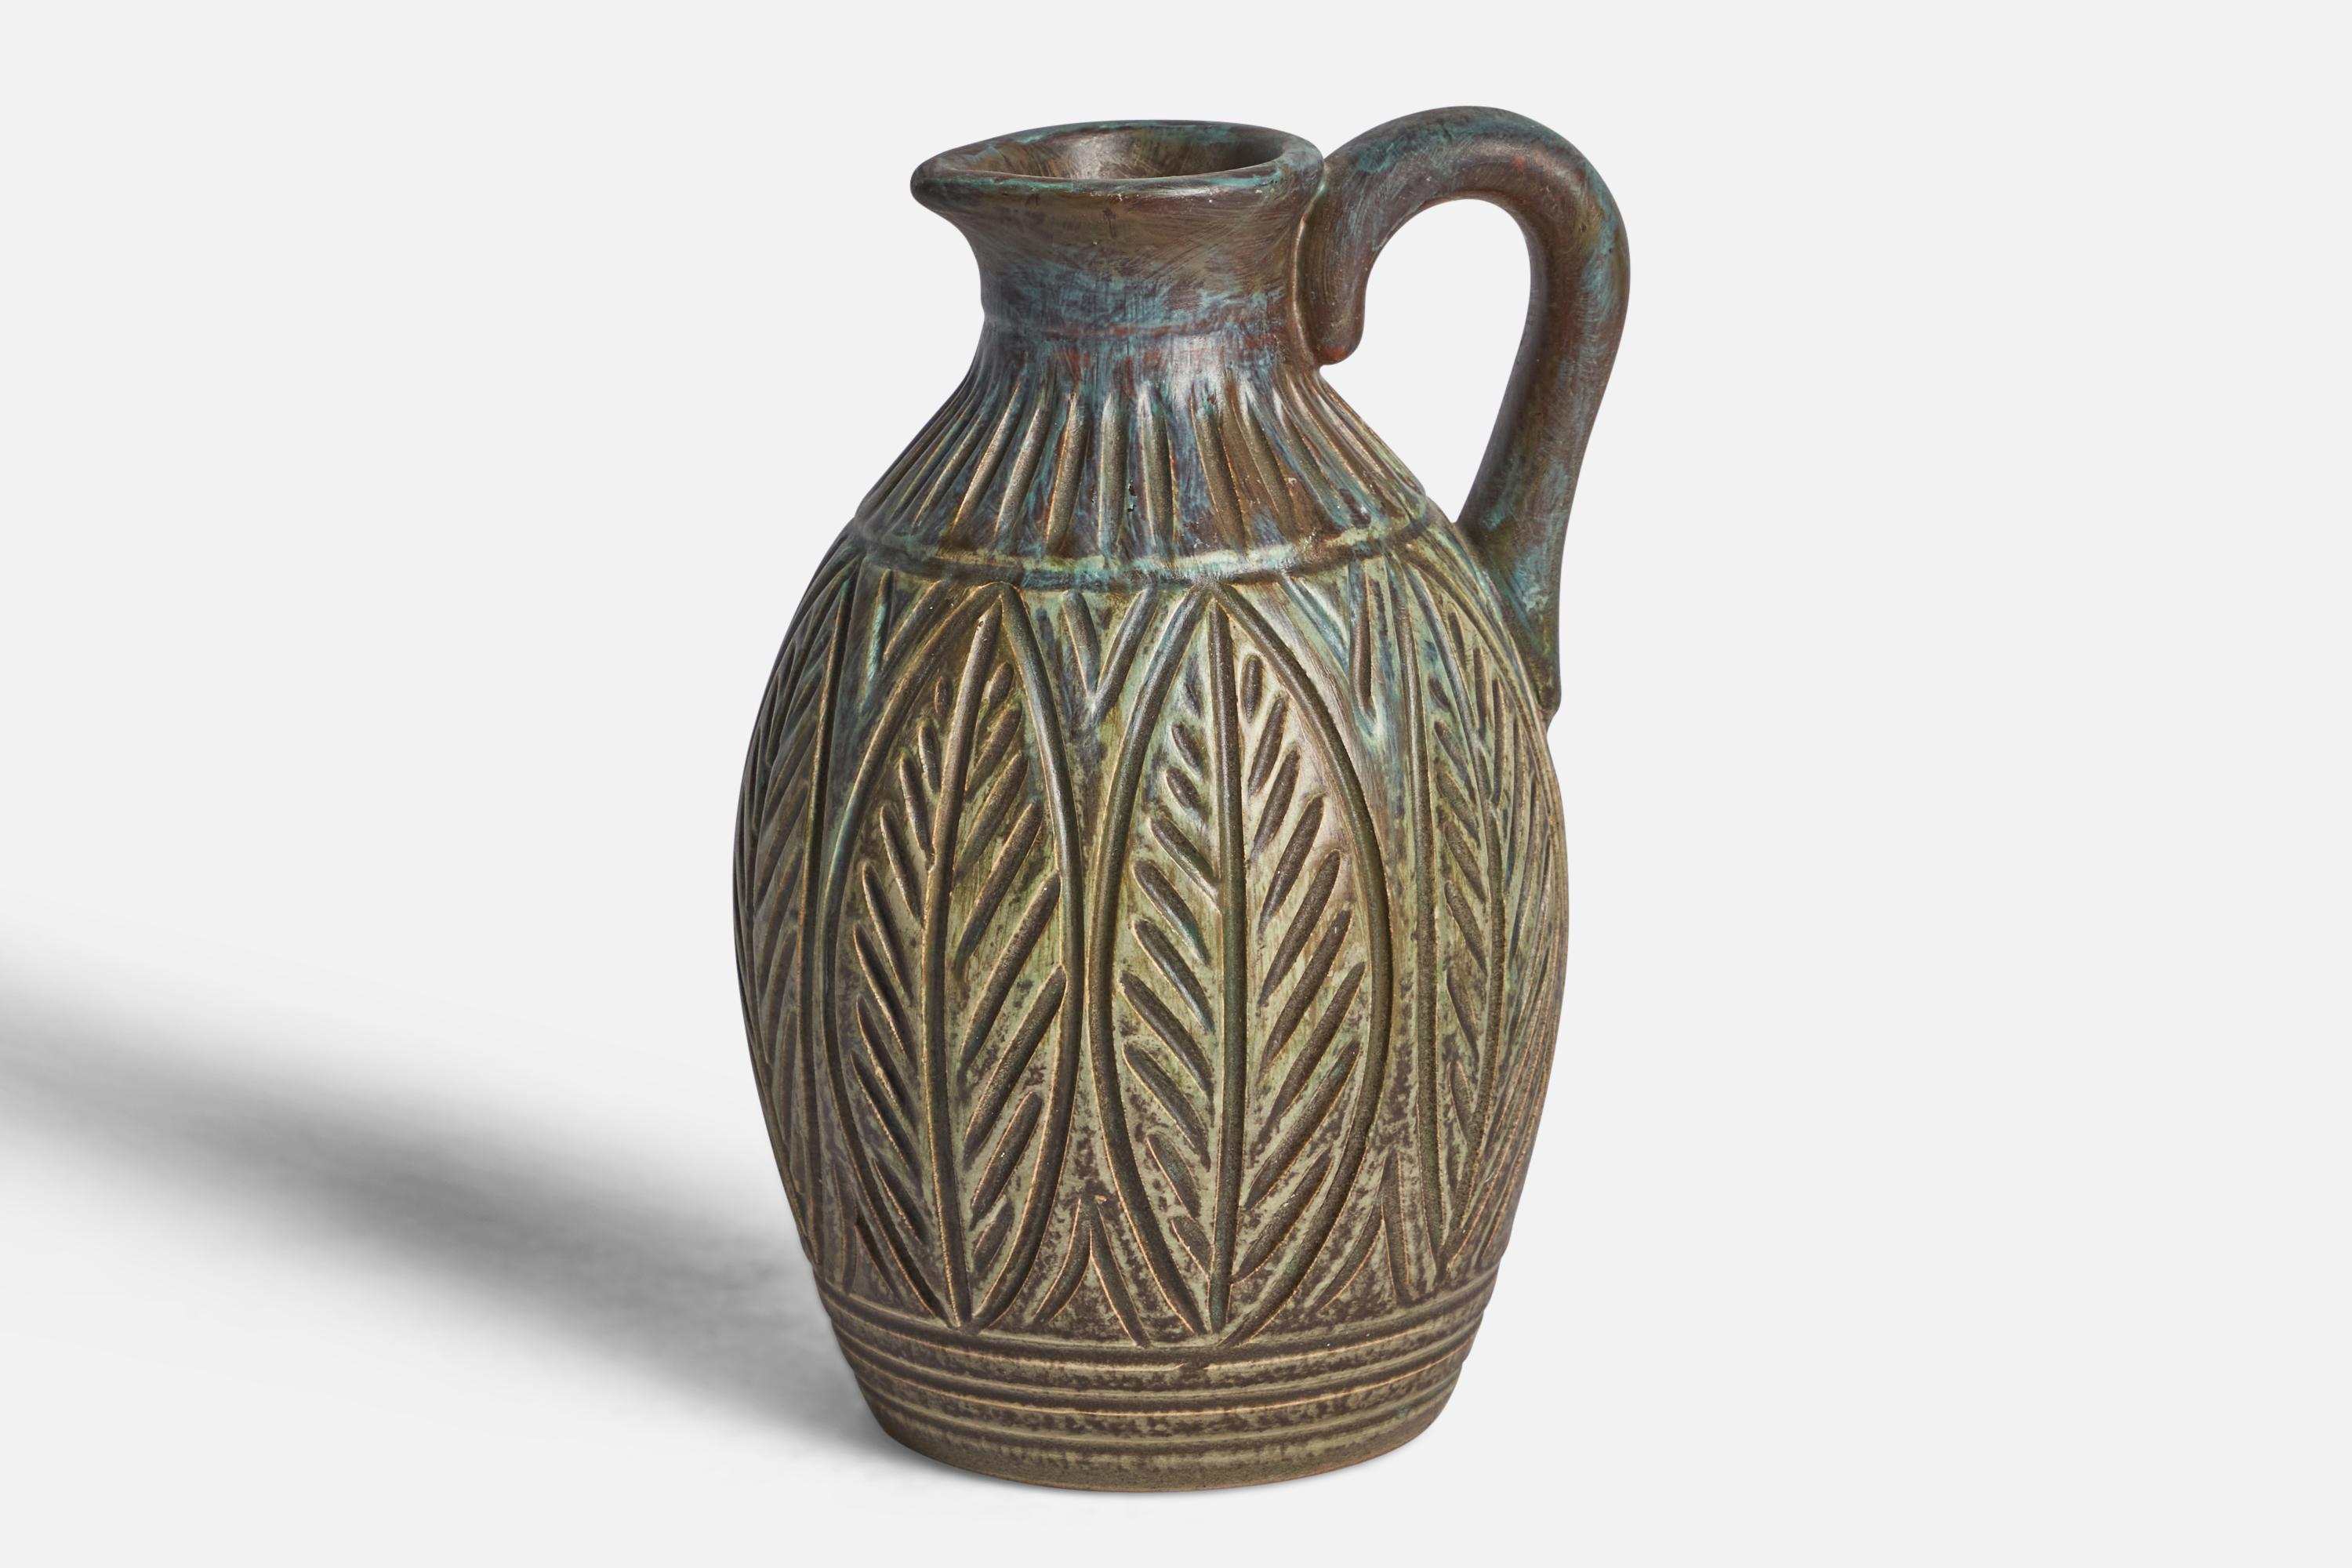 An incised green and grey-glazed stoneware vase designed and produced by Joghus Keramik, Bornholm, Denmark, c. 1950s.
